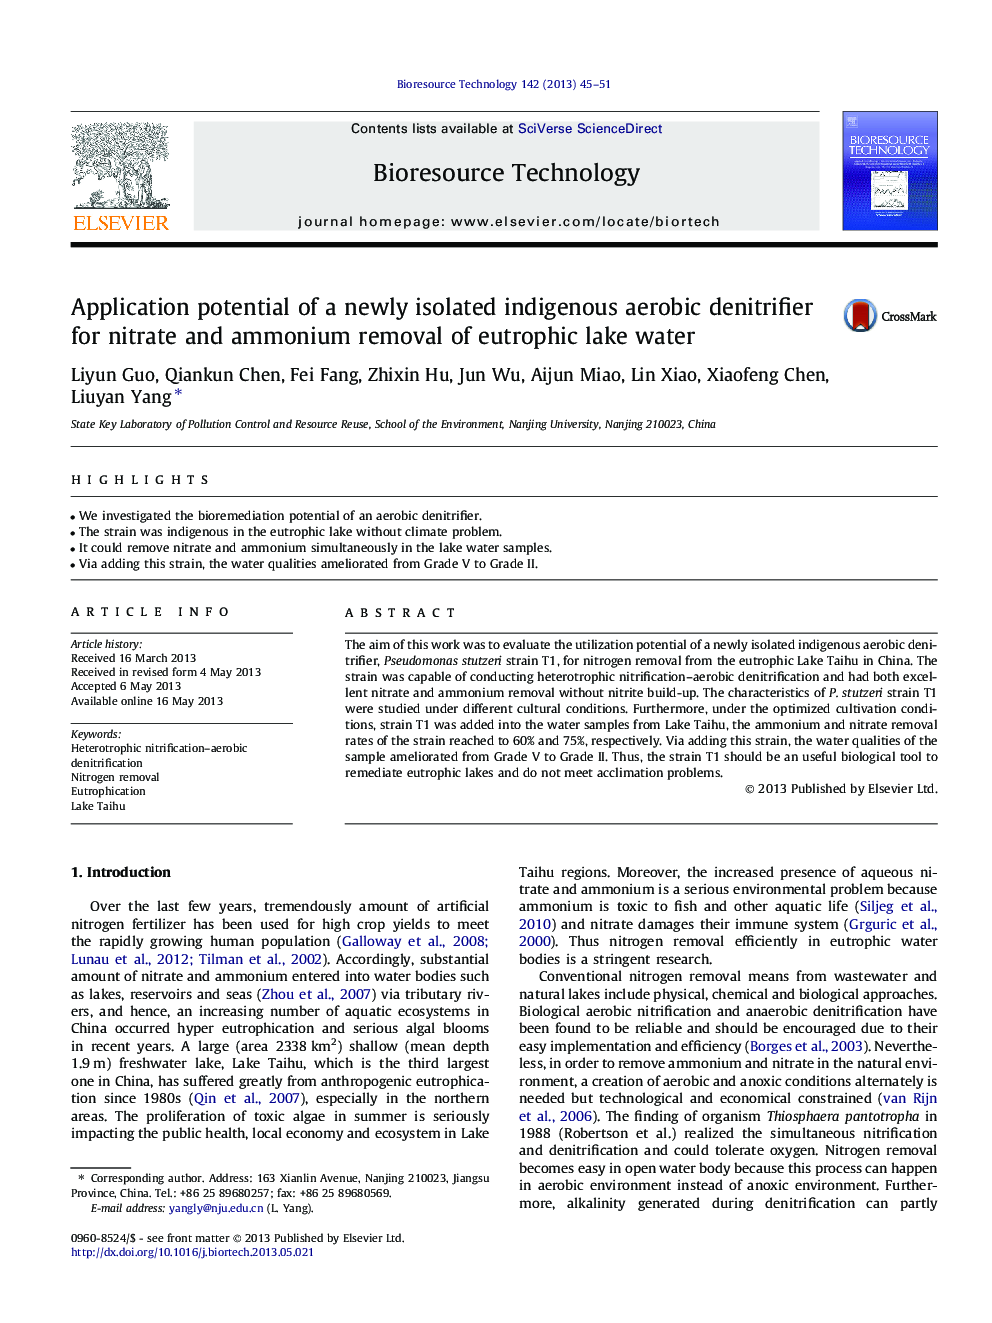 Application potential of a newly isolated indigenous aerobic denitrifier for nitrate and ammonium removal of eutrophic lake water